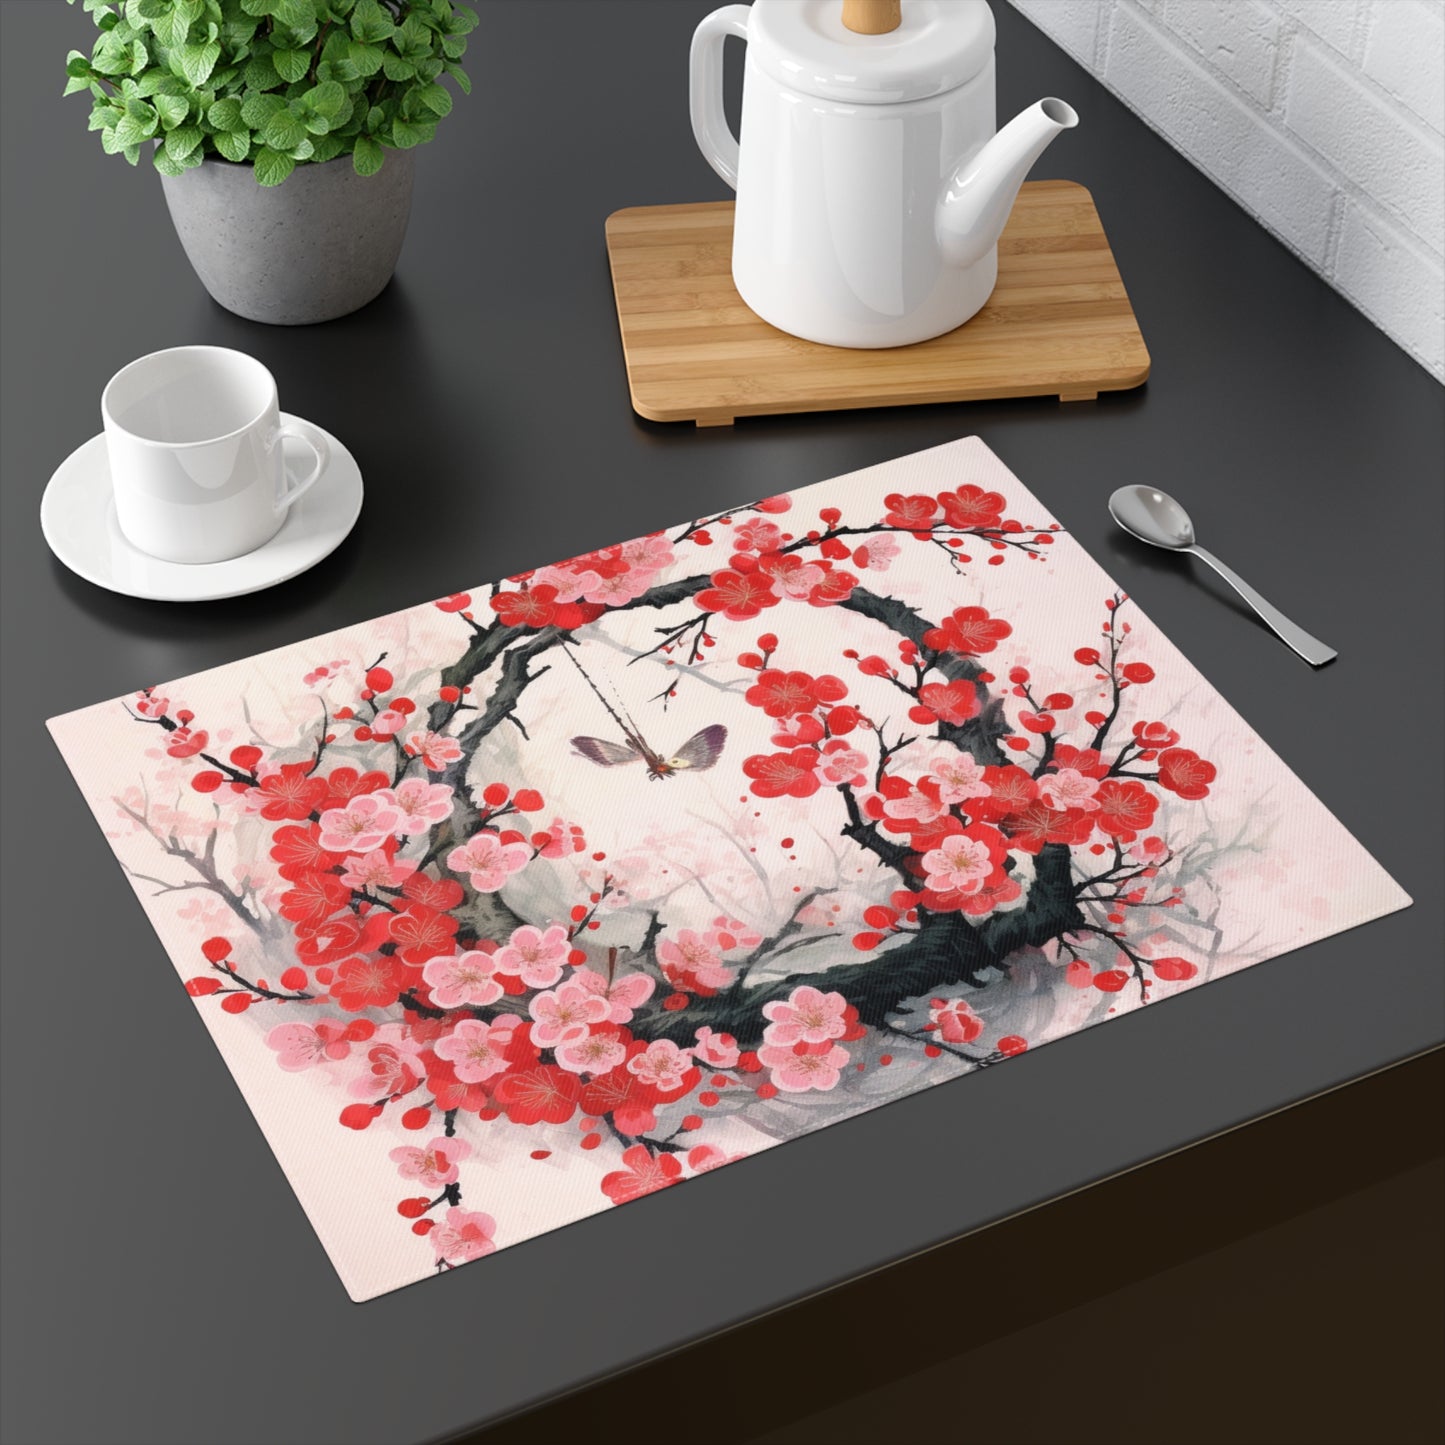 Cherry Blossom Delight: Placemat Adorned with Intricate Flower Drawings and Artistry